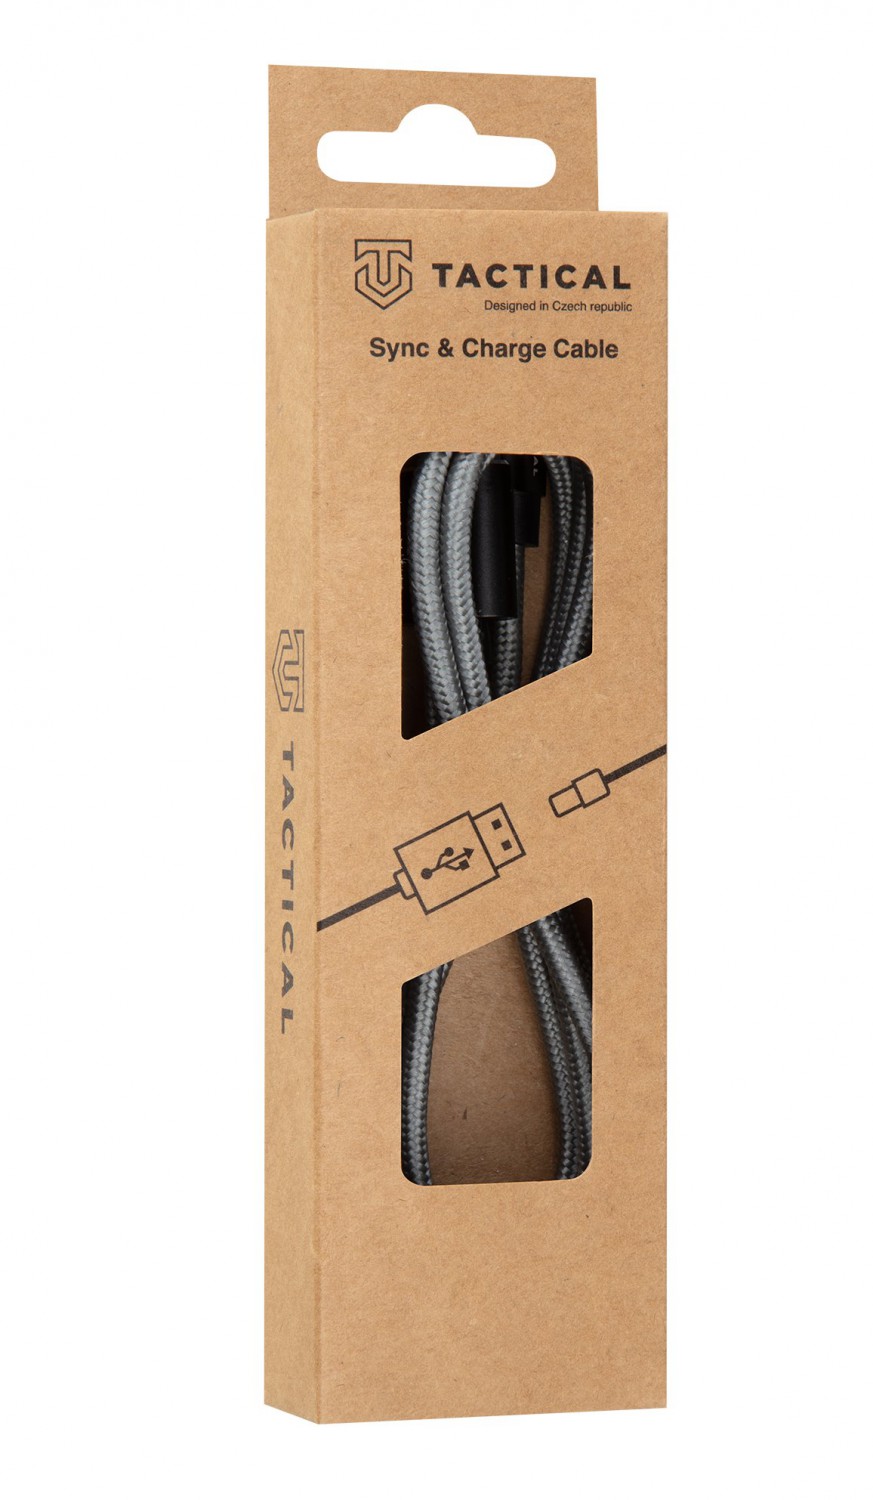 Kabel Tactical Fast Rope Aramid Cable USB-A/USB-C - SuperVOOC 2.0 CHARGE, 1m, šedá